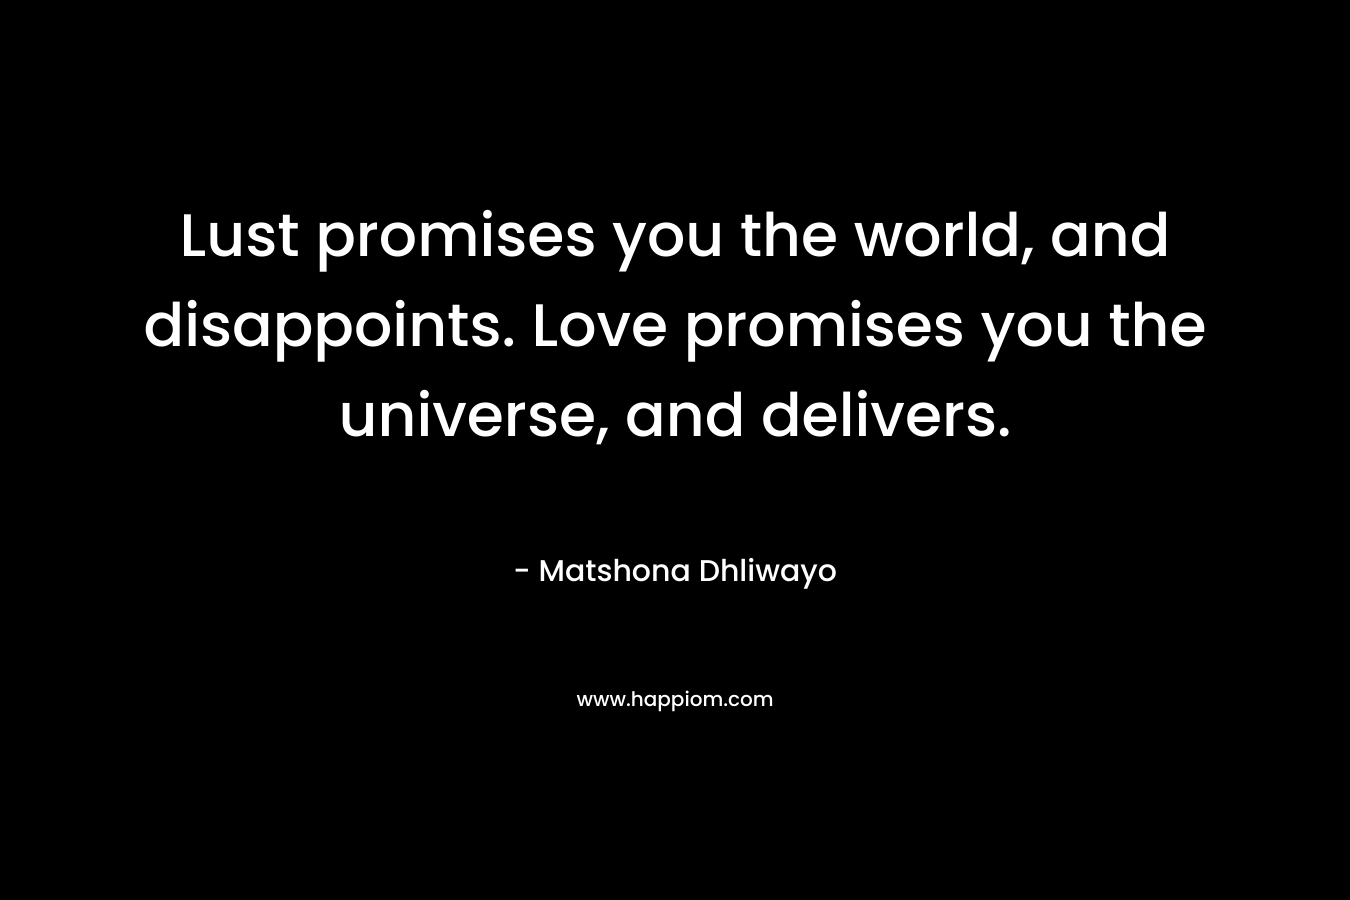 Lust promises you the world, and disappoints. Love promises you the universe, and delivers.